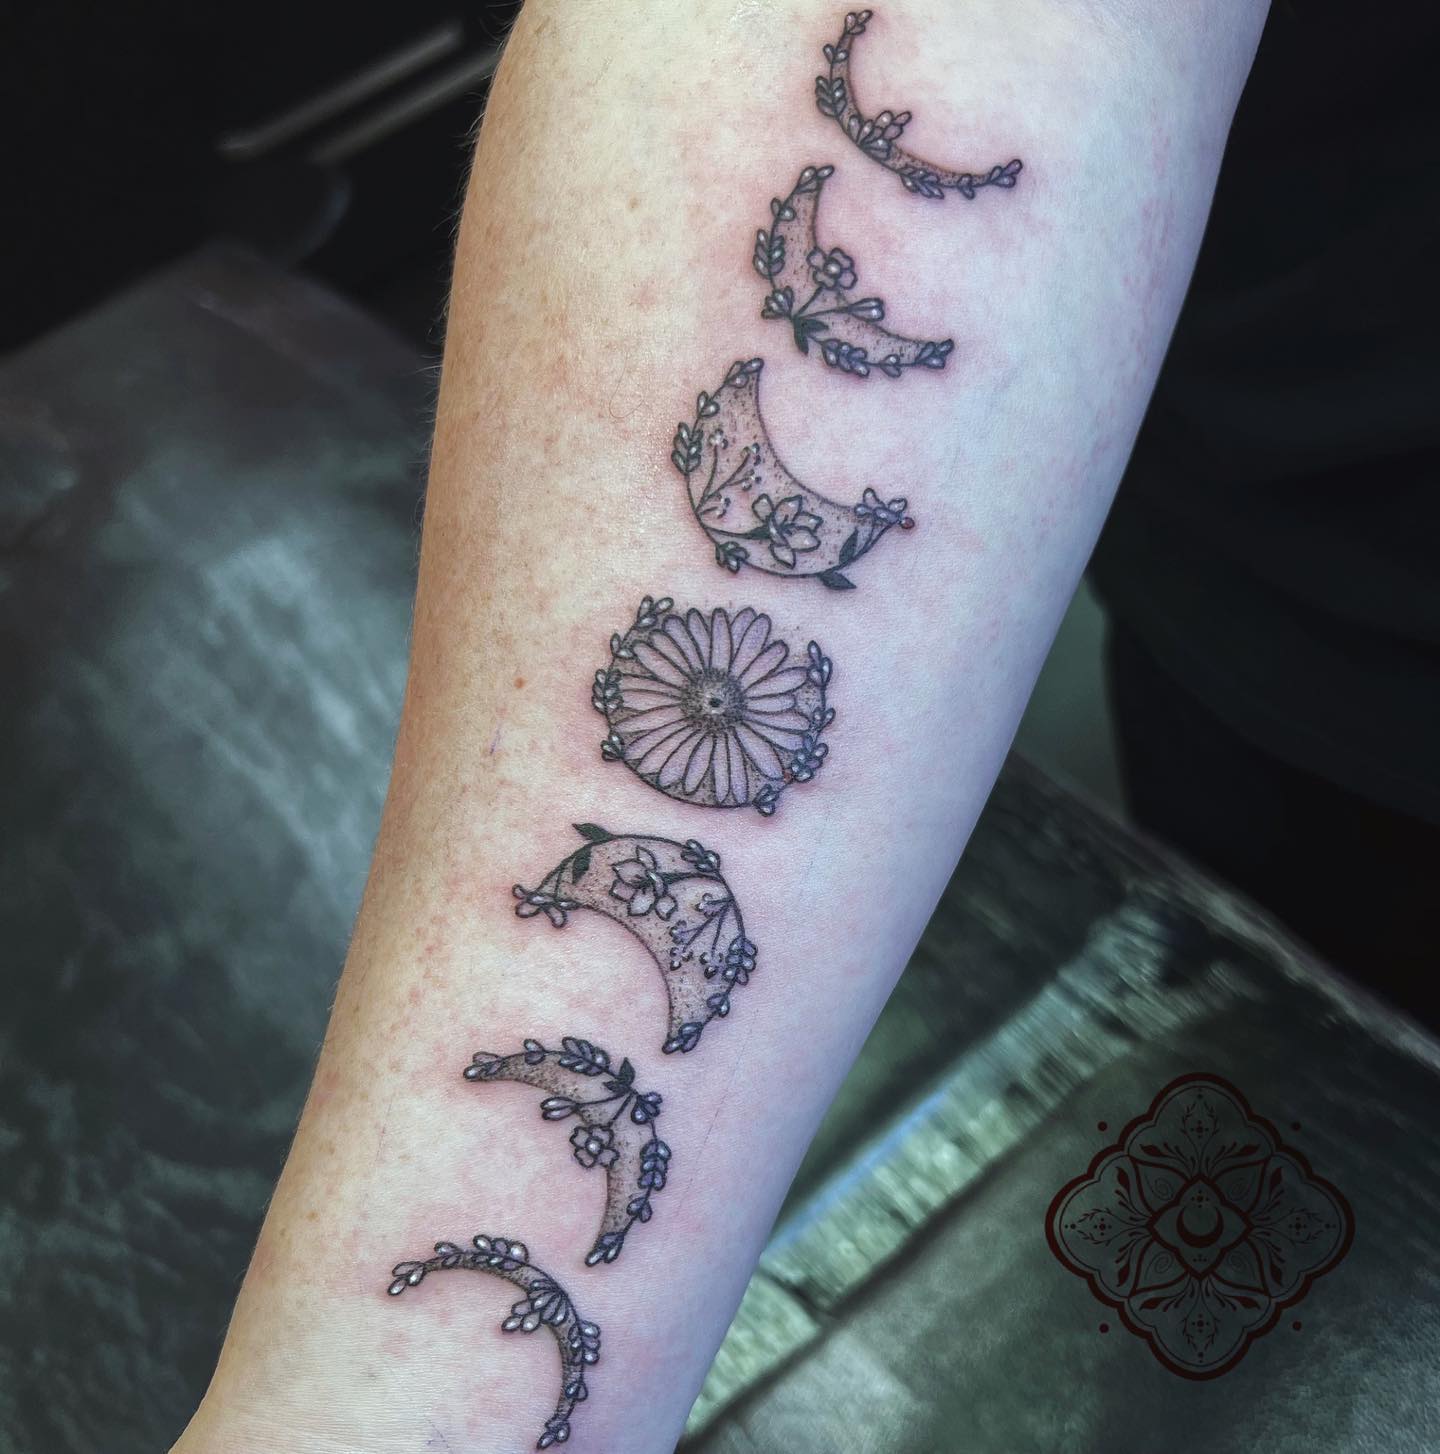 Floral Moon Phases 🌙 Thanks dear Rachel✨
Done at studioxiiigallery 
•
•
•
•
•
•
•
•
             